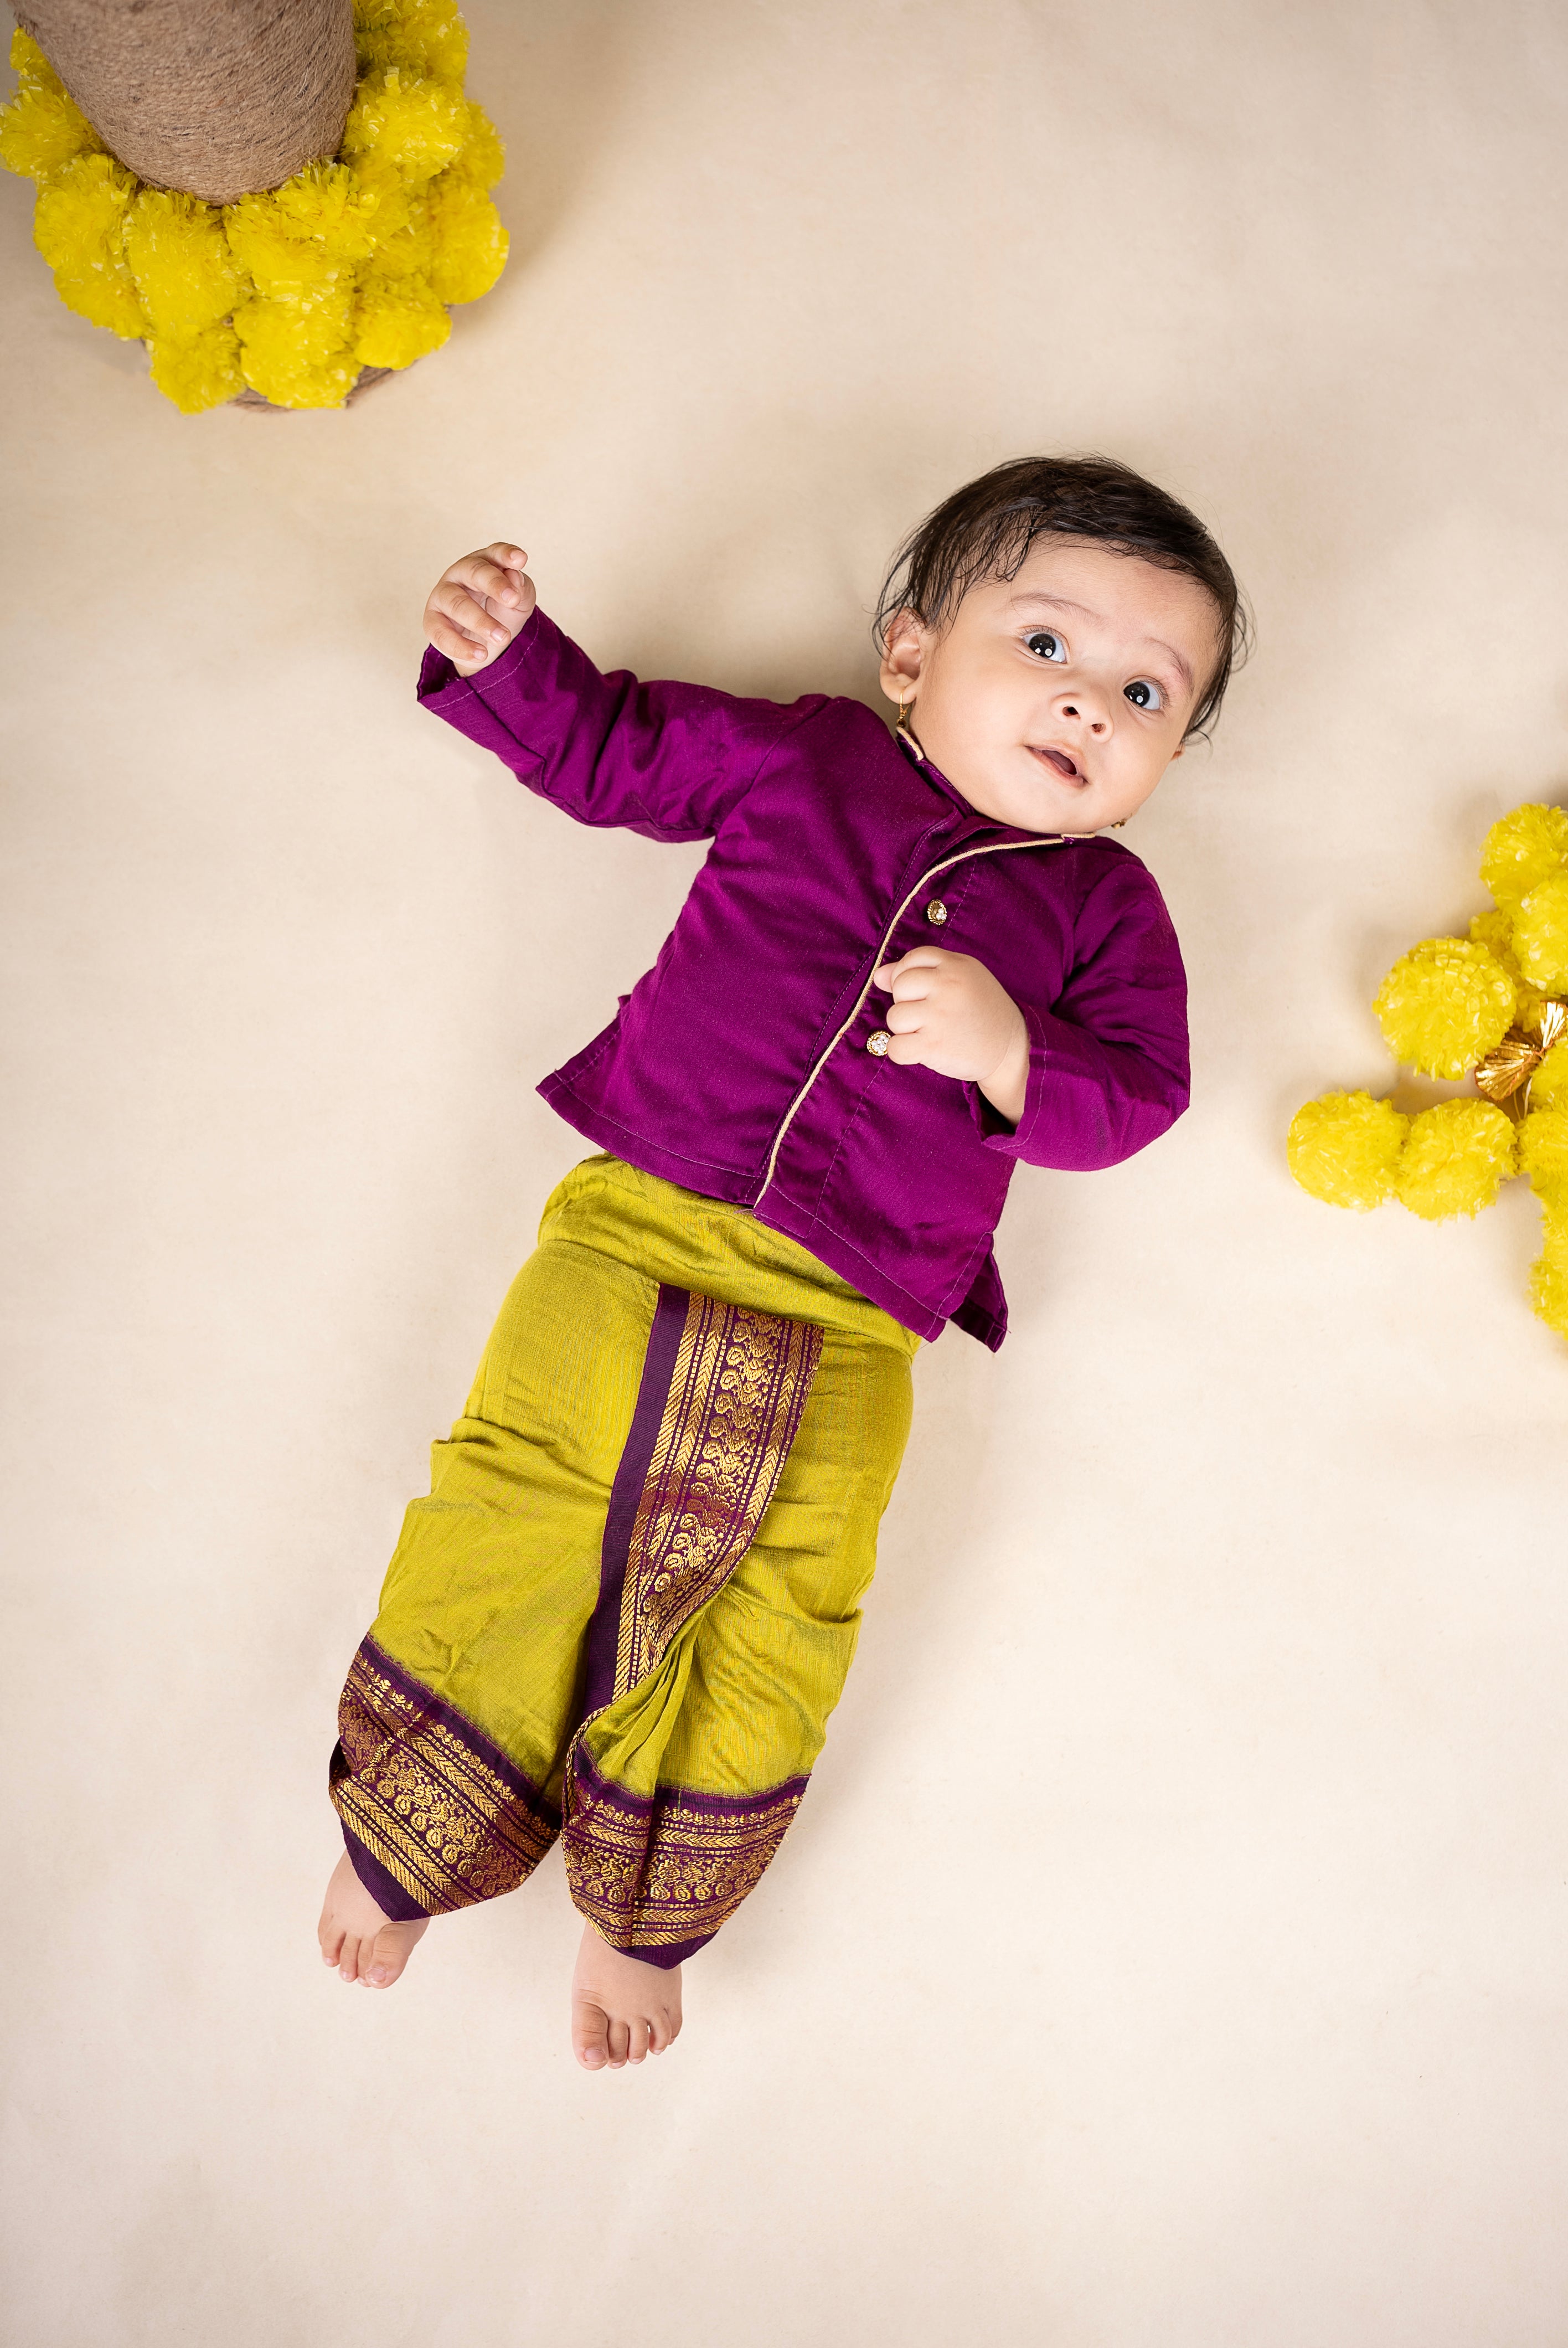 Buy Ethnic Wear for Boys/Girls Online in India - Shop at Fashion-Wear.in